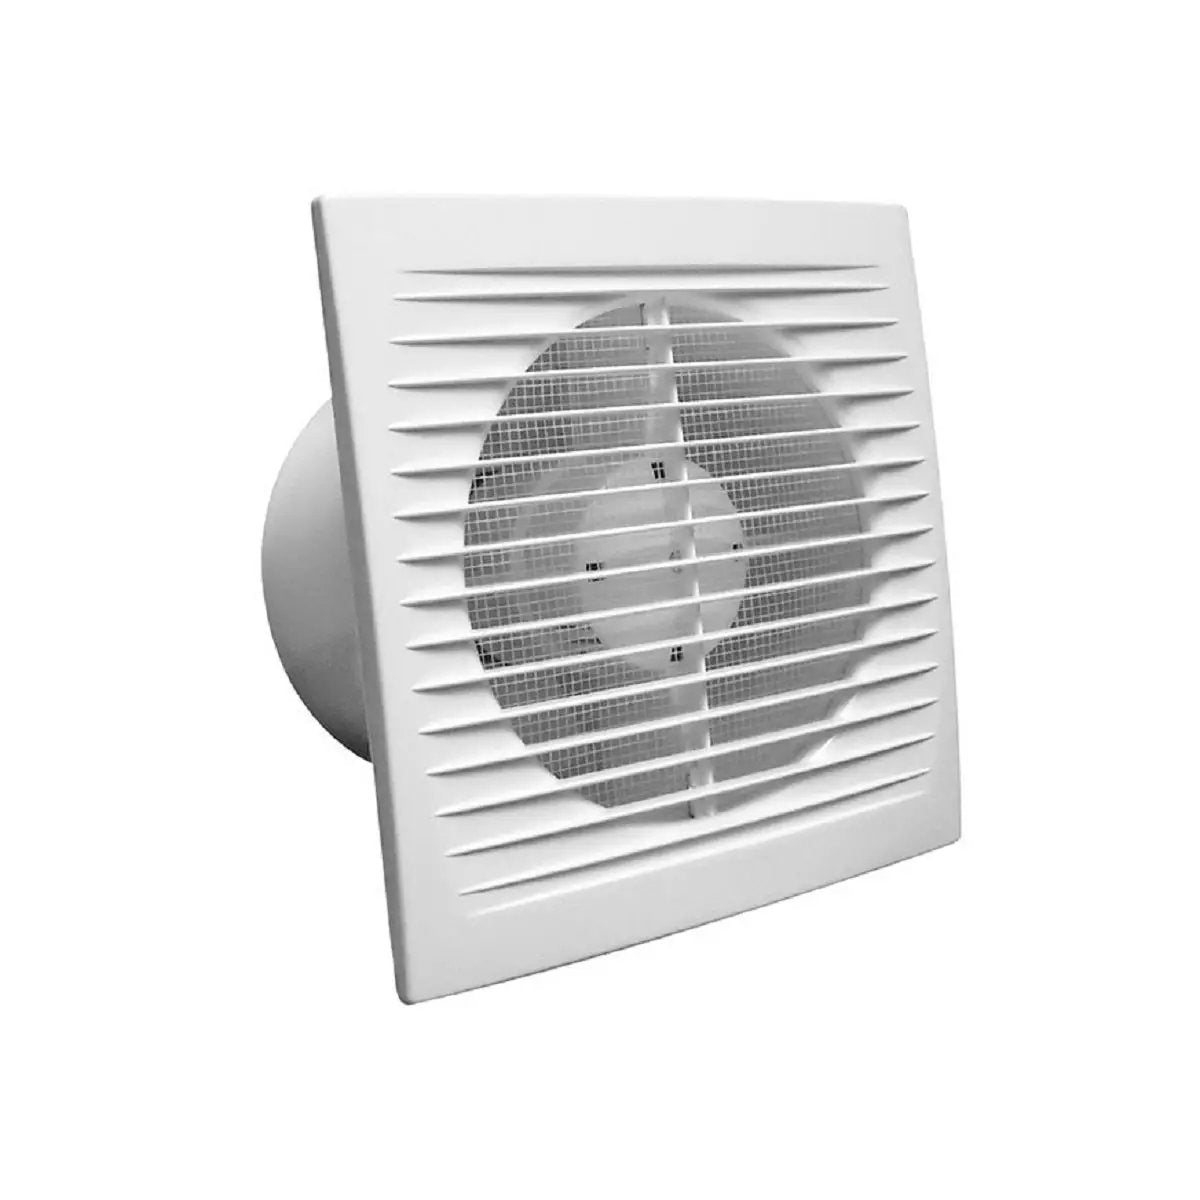 Winflex VKOs 150mm - 300m3/h - Wall exhaust fan with grille